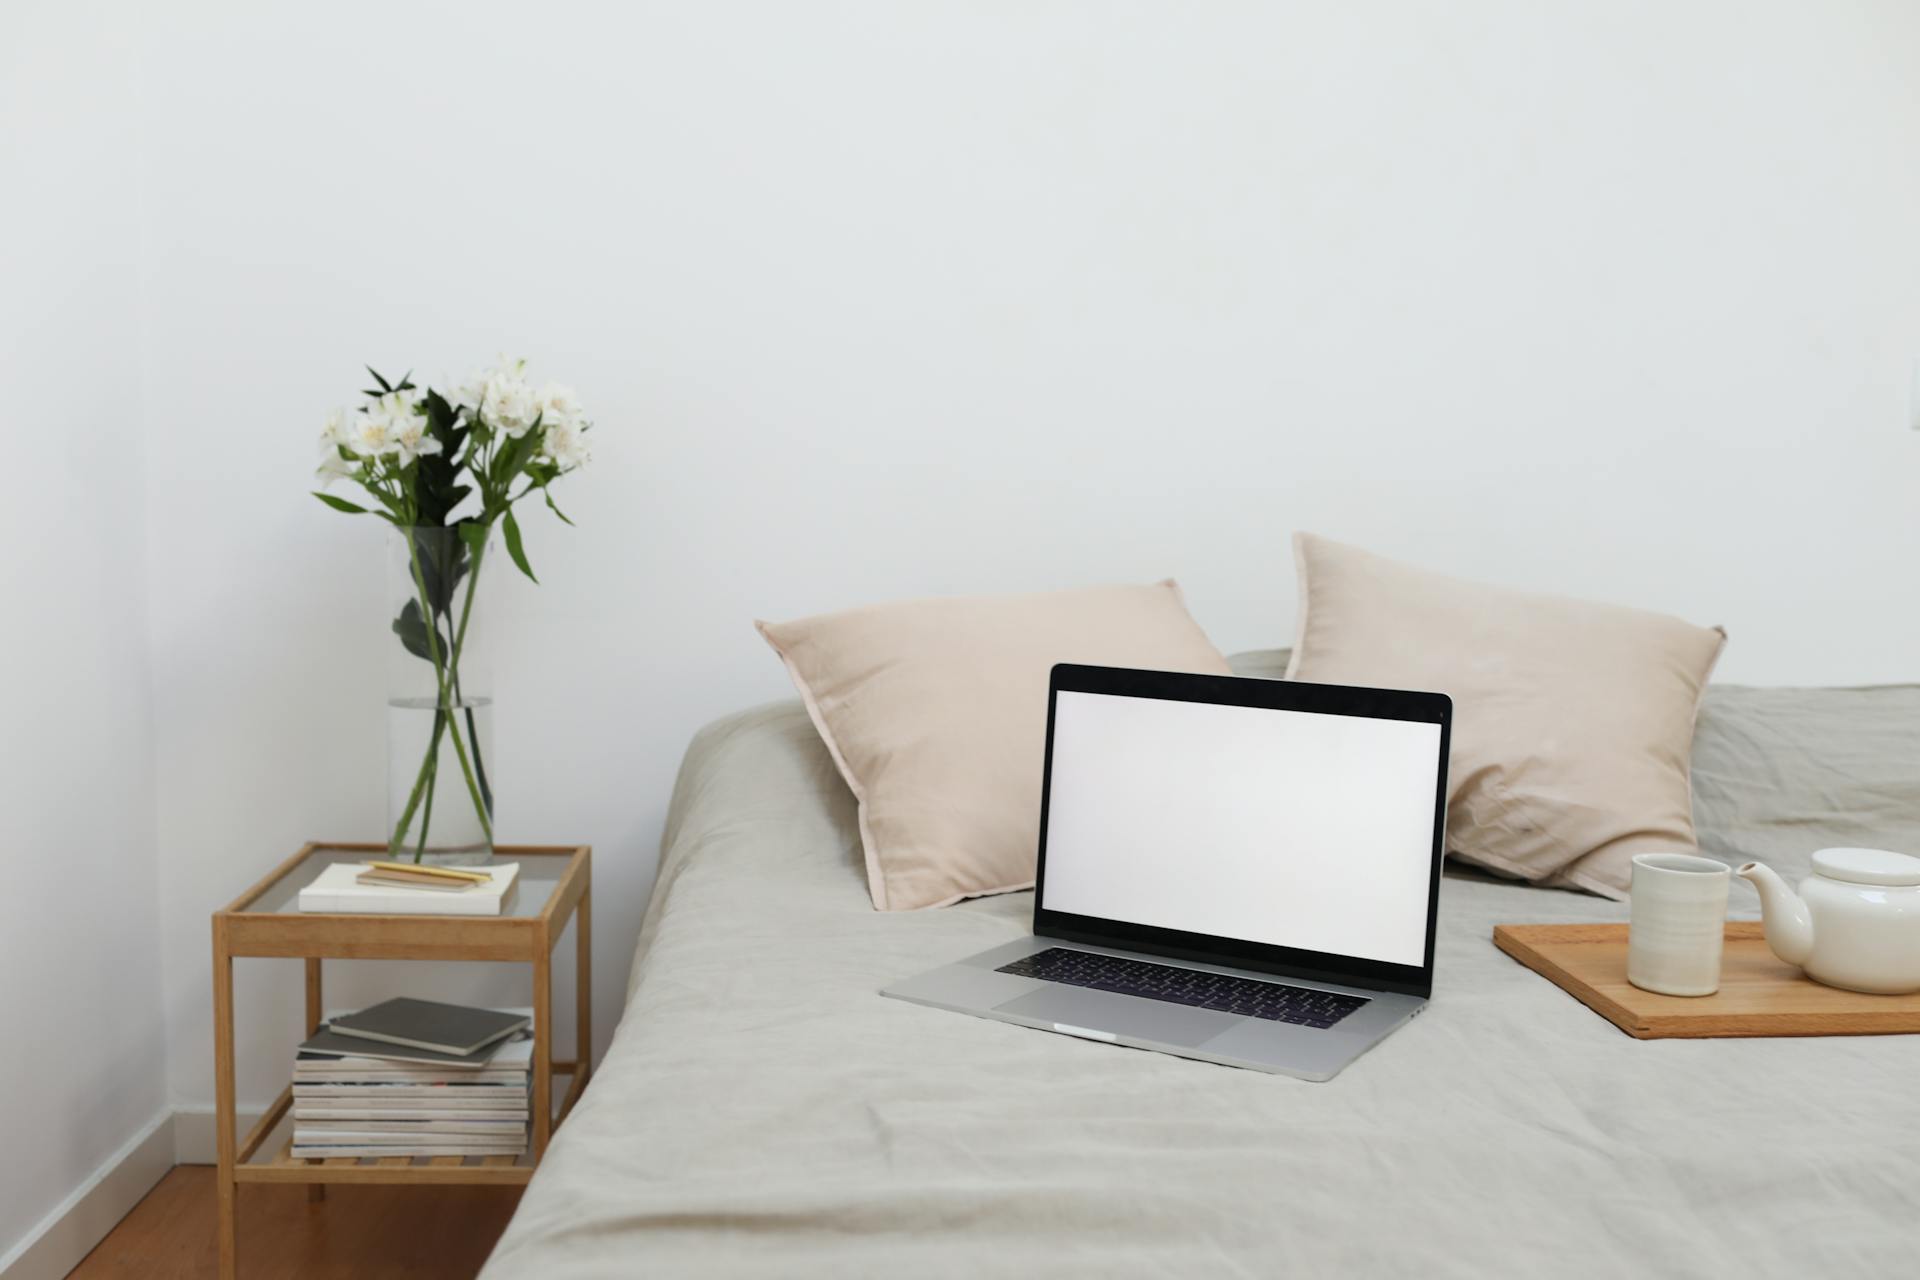 Tray with tea set and laptop placed on bed near table with flowers vase